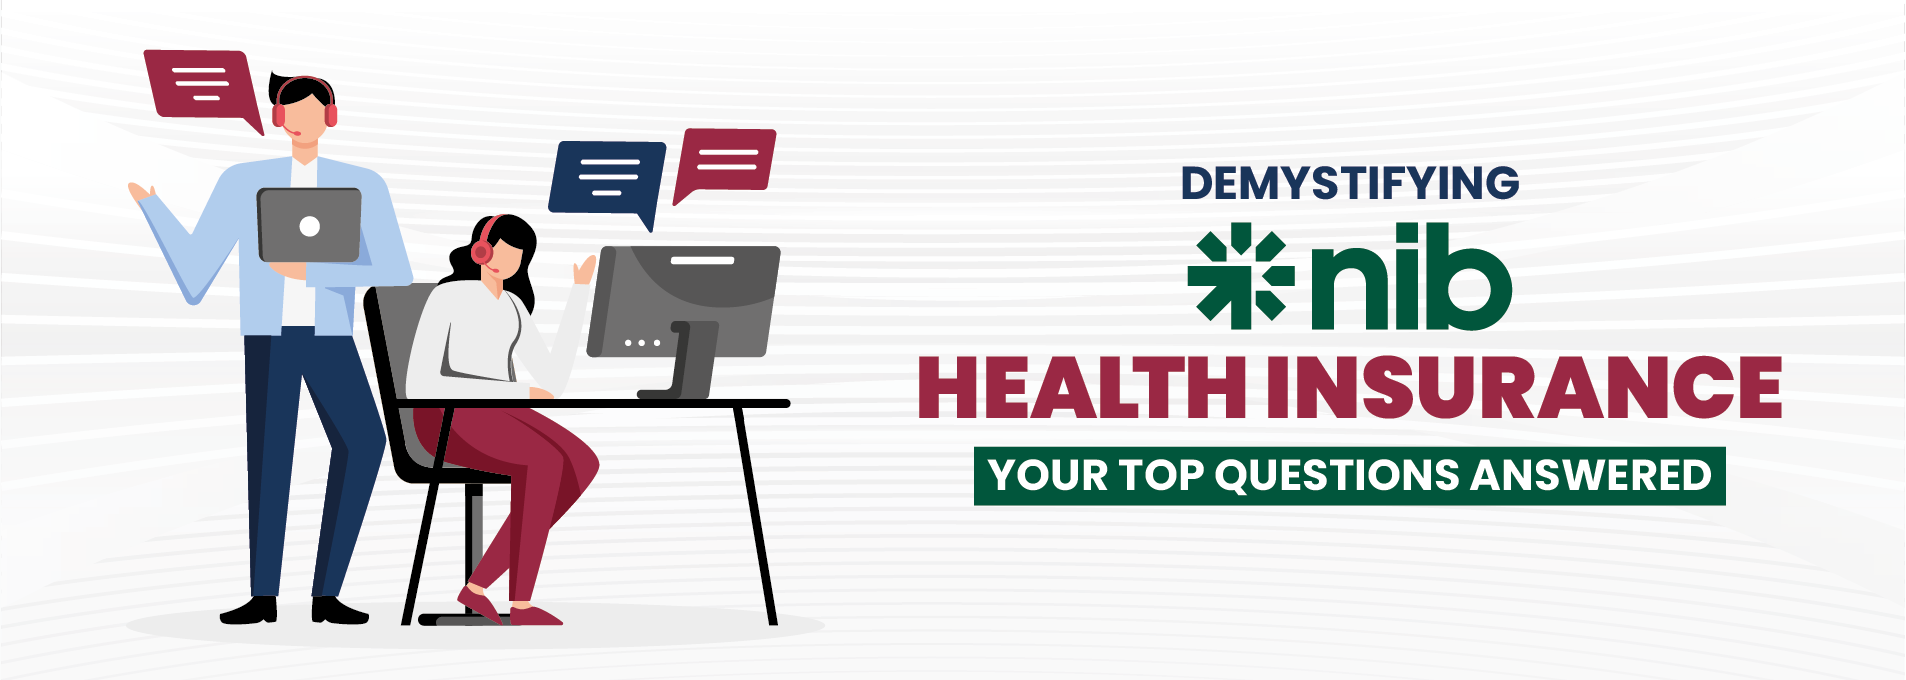 Demystifying nib Health Insurance: Your Top Questions Answered